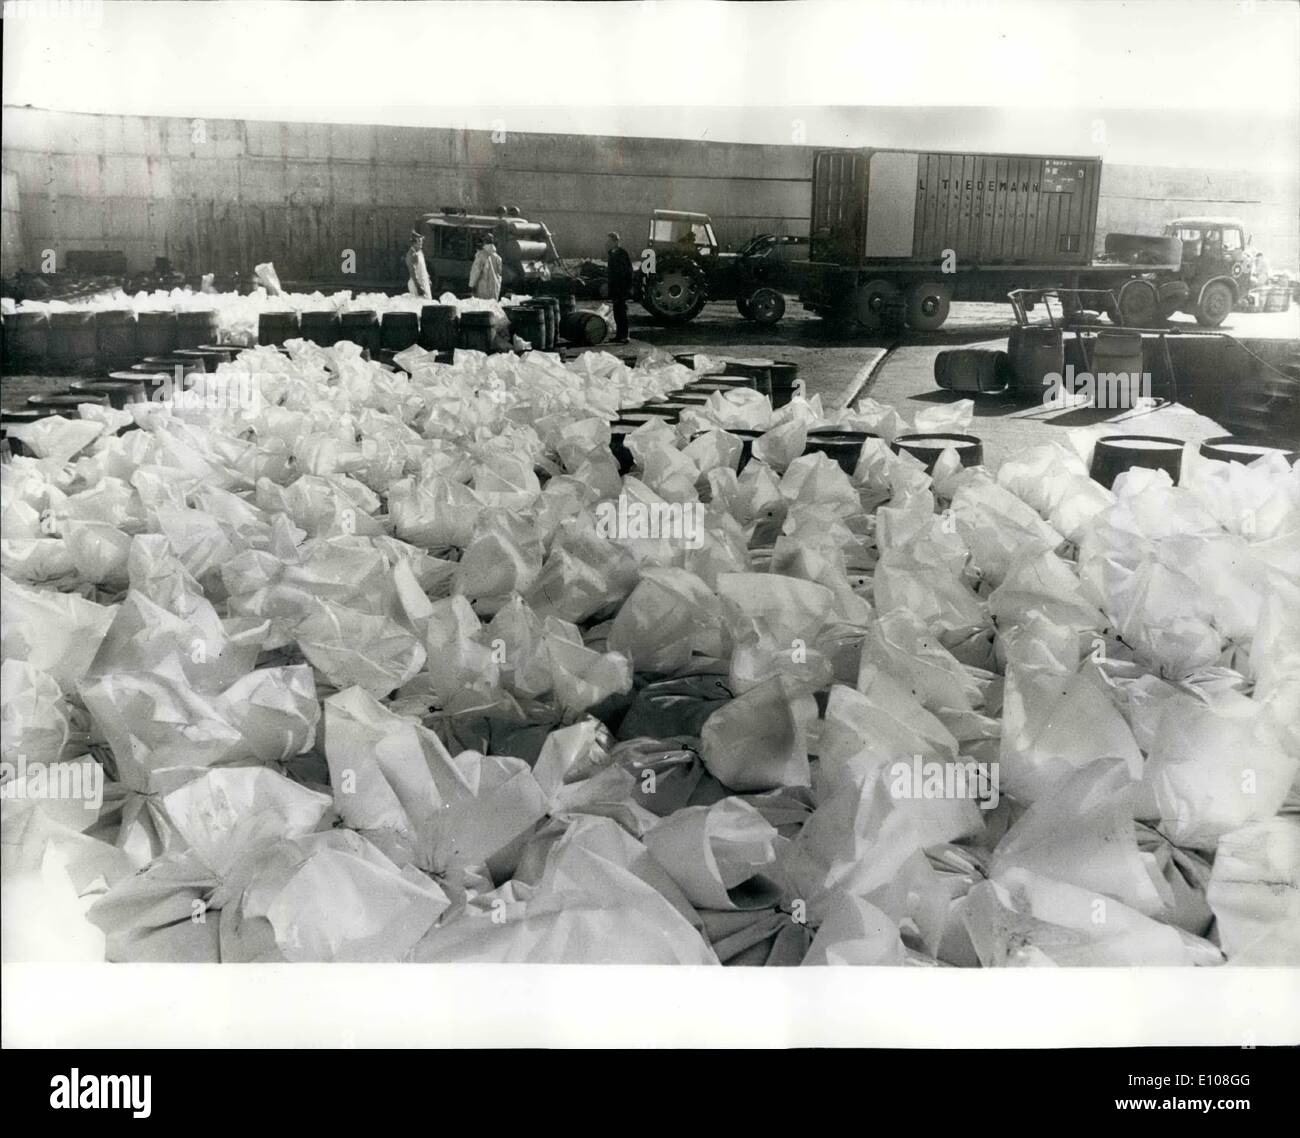 Mar. 03, 1970 - Record Irish Herring catch goes to continent in Plastics Bags: With auction money from 10,000 tons of herring safely lodged in the banks, the trawlermen are leaving Dunmore East, Co. Waterford, after the best catching season on record - double the 1968-69 catch: 10,000 tons represent 65,000 cran (37 1/2 gallons each) roughly shared out between 70 Irish-owned vessels. A spolesman for the Irish Fishery Board said that it was very much surprised at the ''Phenomenal'' size of the season's catch Stock Photo